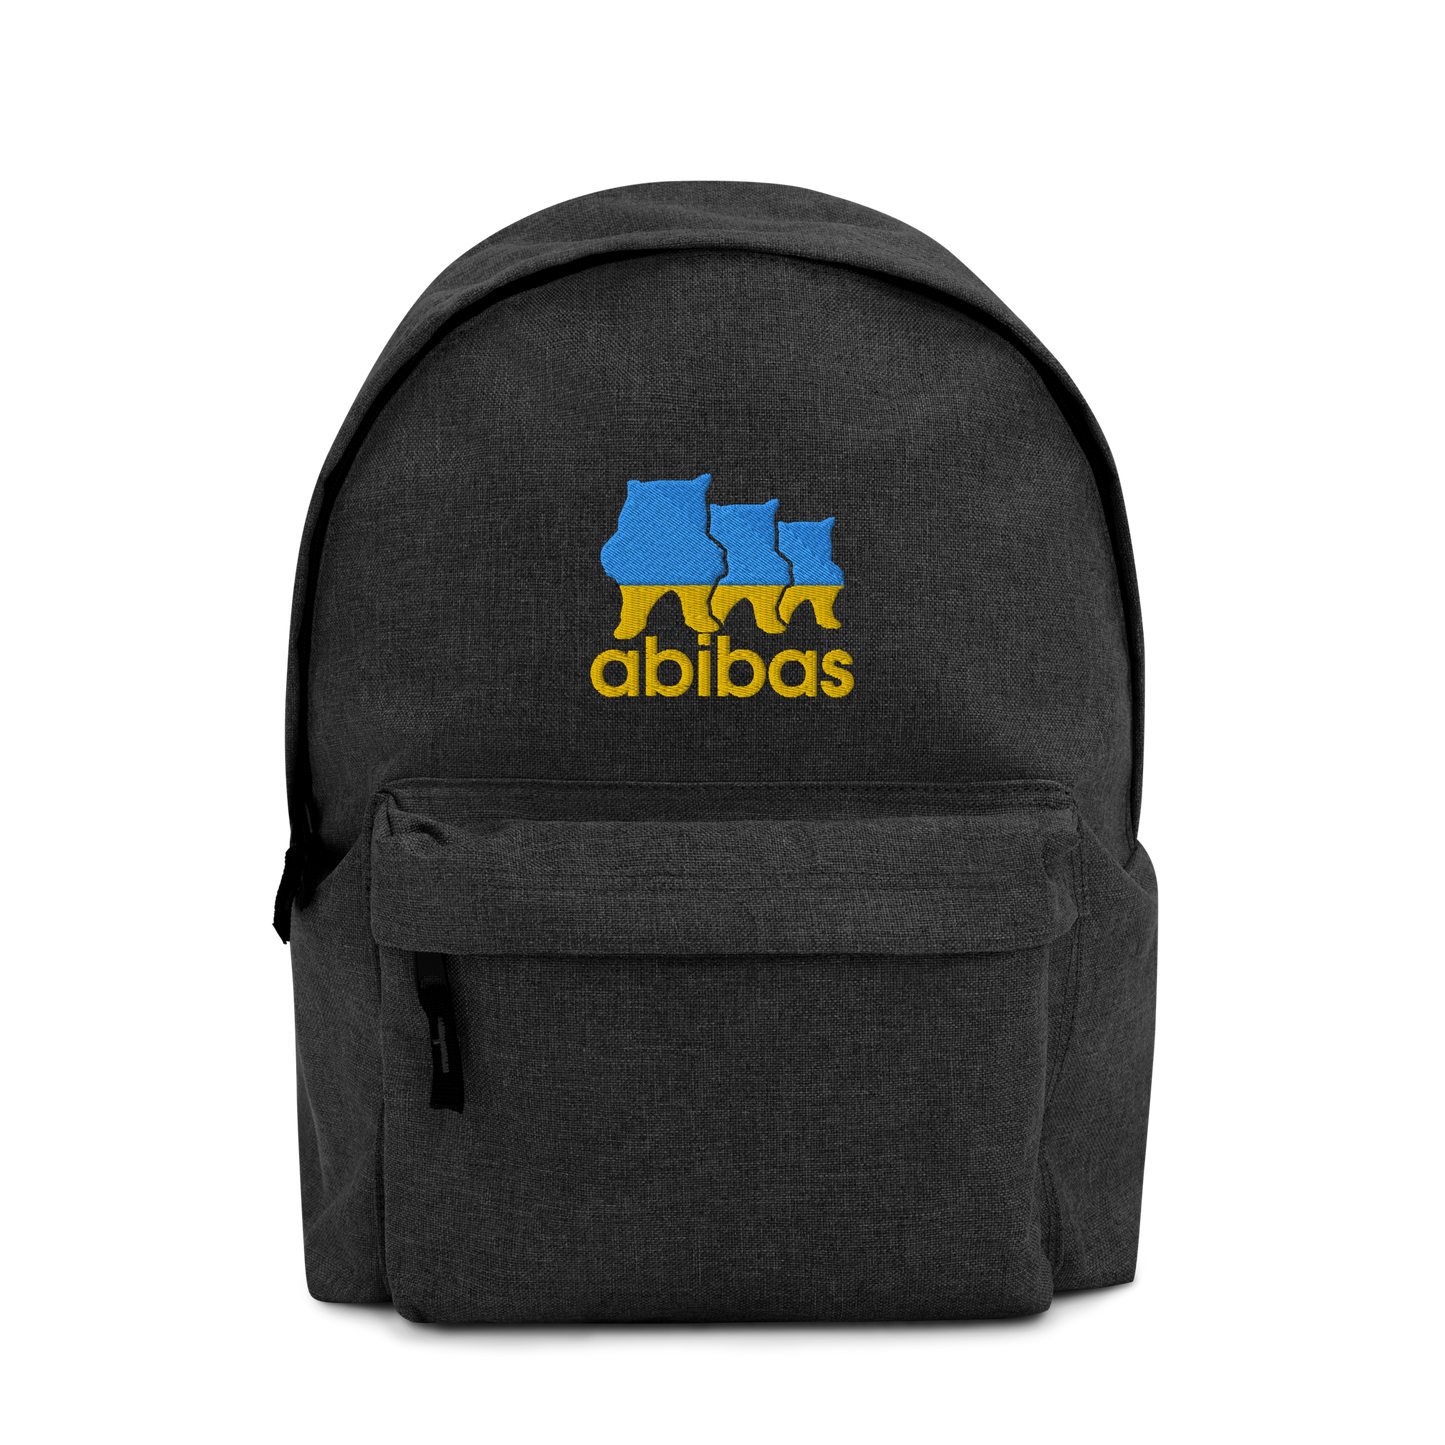 NAFO Abibas Embroidered Backpack